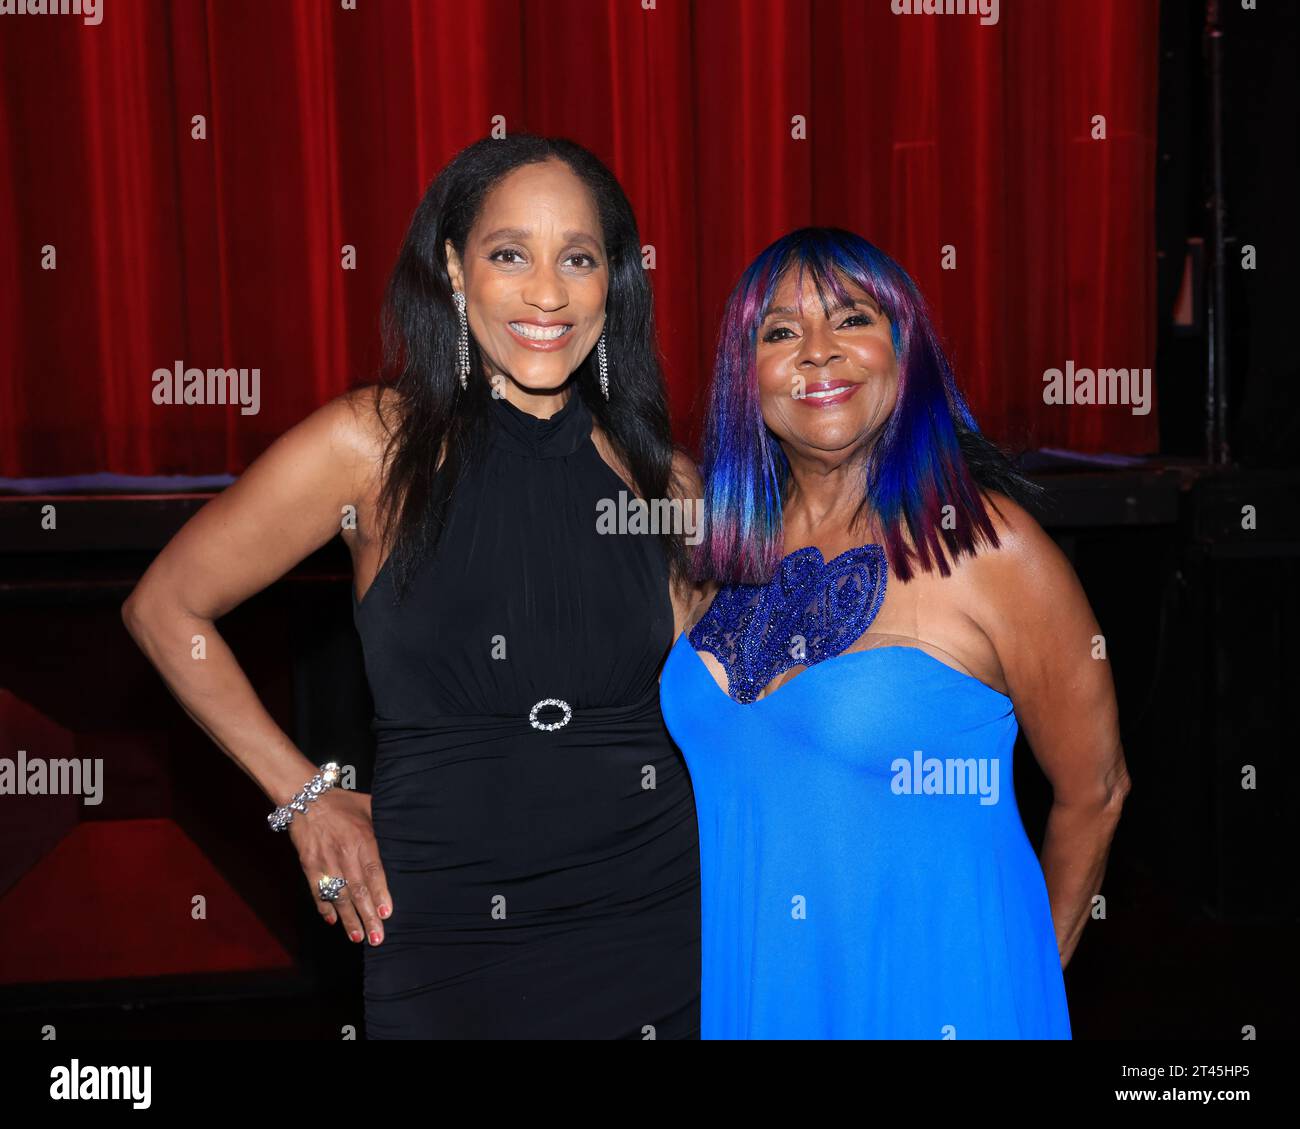 Hollywood, California, USA. 22nd October, 2023. Karla Gordy Bristol and singer Thelma Houston attending the Luminario Ballet's 'Lucky 13 Season' gala fundraiser and performance - ZARATHUSTRA! at the Avalon Hollywood in Hollywood, California.  Luminario Ballet of Los Angeles is an award-winning repertory ballet and aerial dance company reflecting the vibrancy, diversity, and global relevance of Southern California dance.  Credit: Sheri Determan Stock Photo